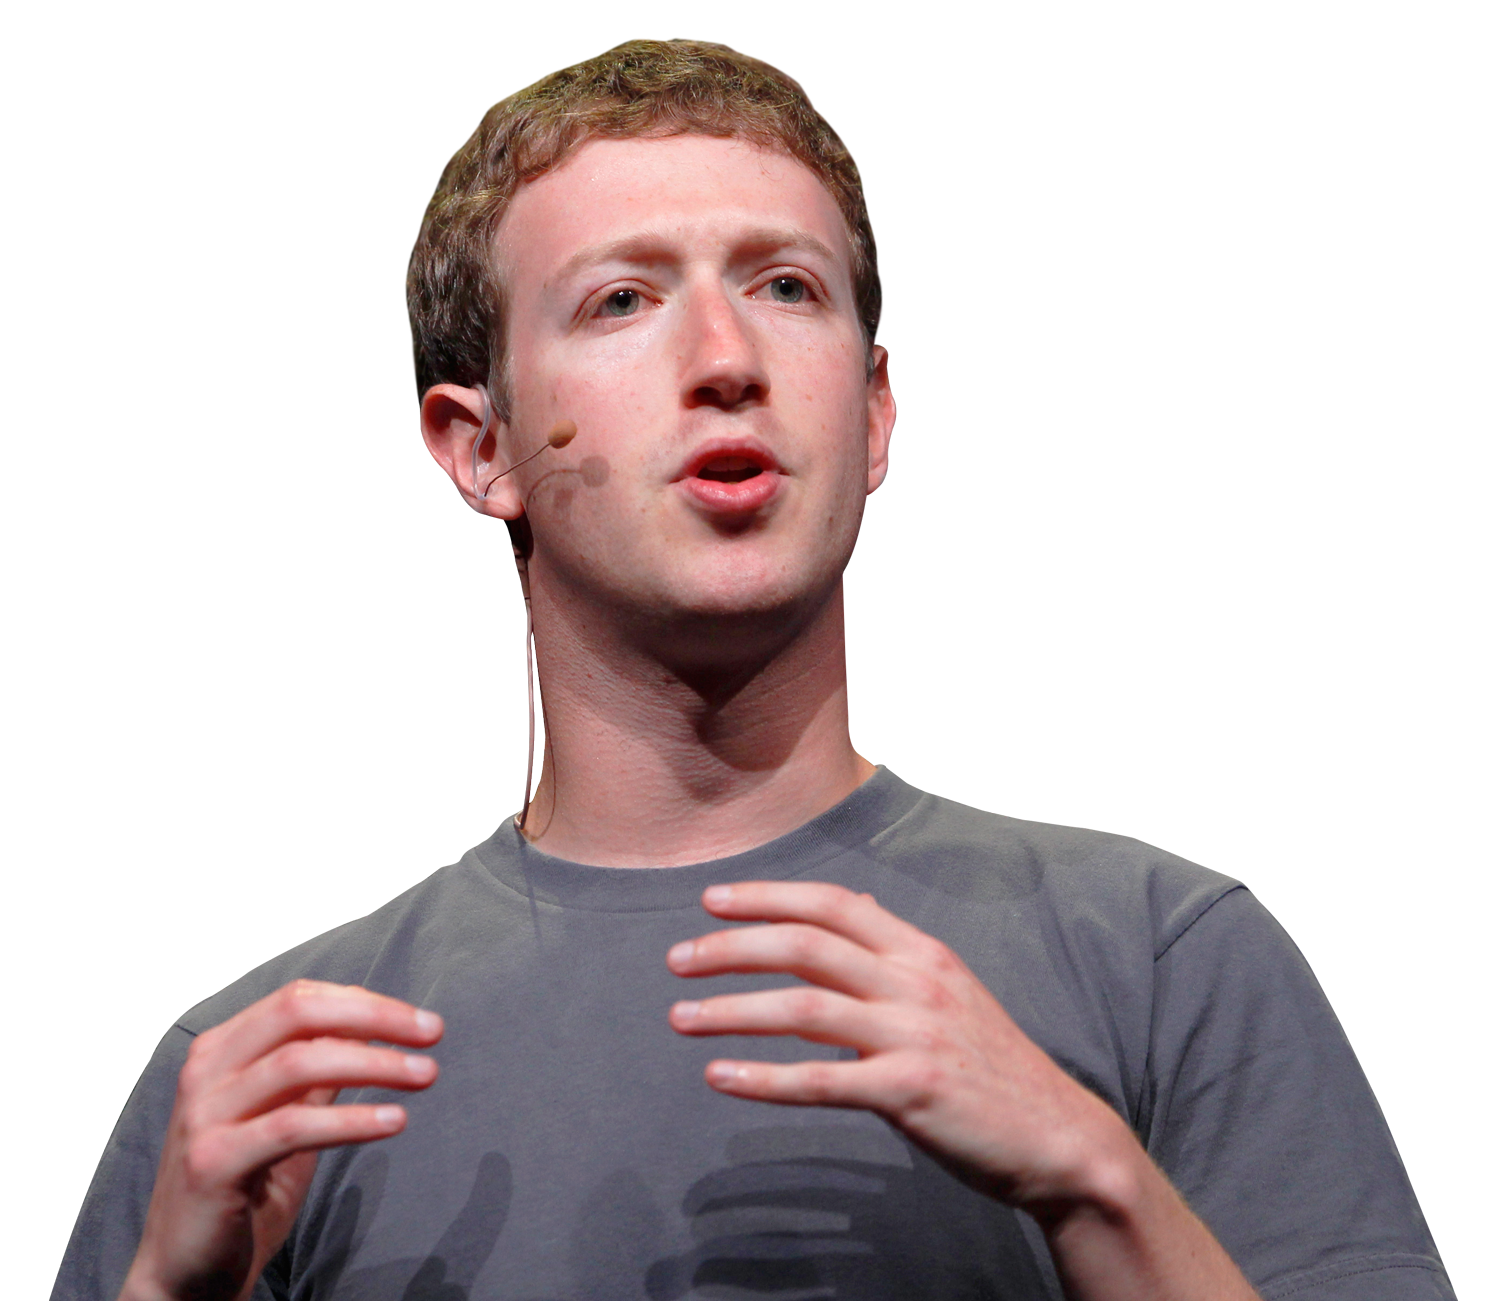 Zuckerberg F8 Icon Facebook Mark HD Image Free PNG PNG Image